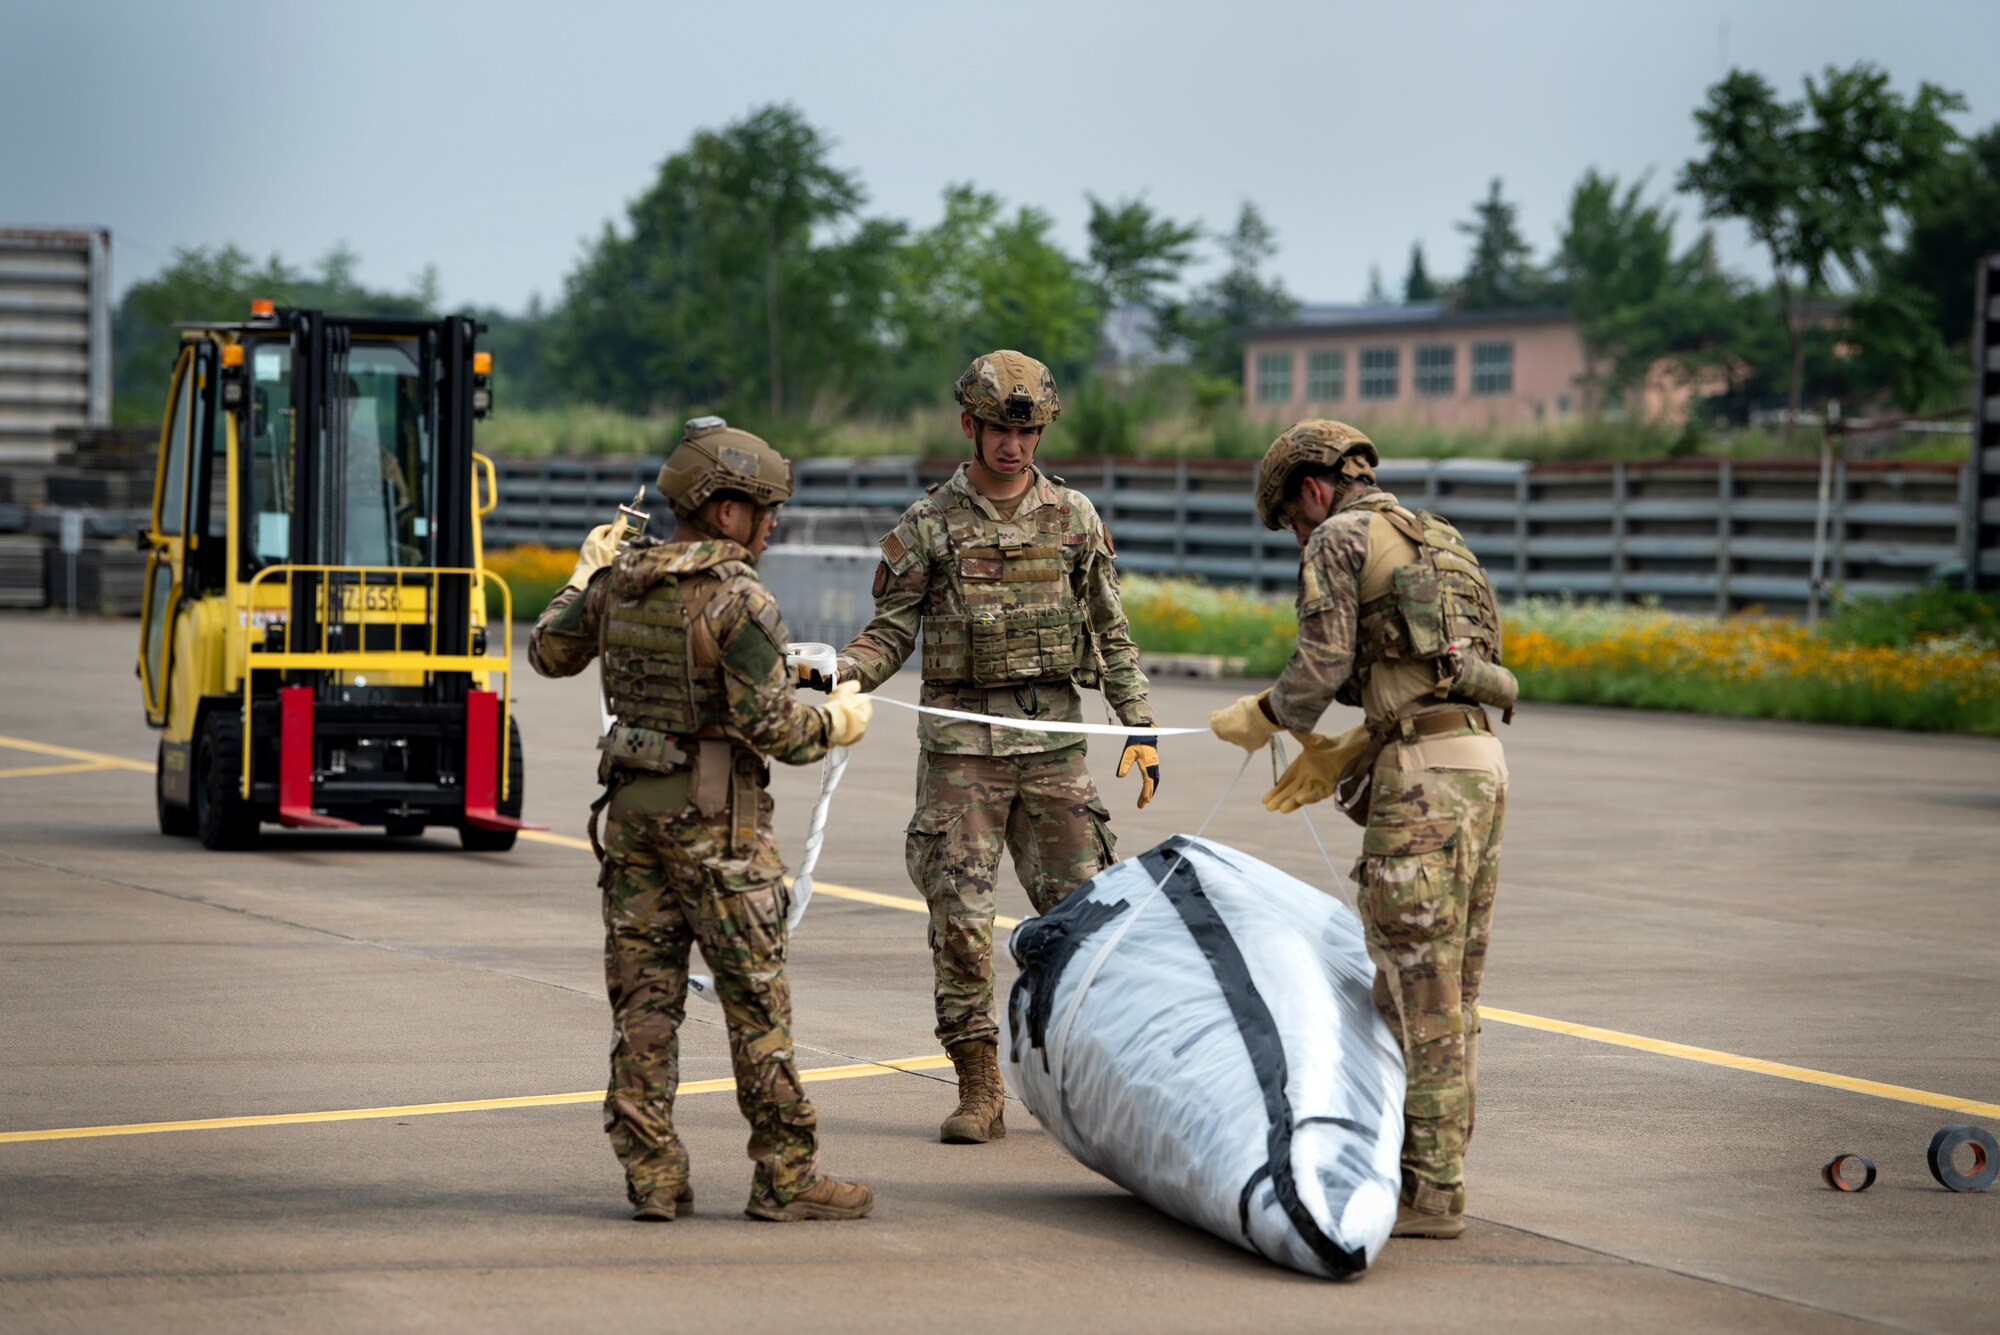 U.S. Air Force Senior Airmen Joshua Young and Omar Navarro, along with Staff Sgt. Michael Augustus, 35th Civil Engineer Squadron, Explosive Ordnance Disposal technicians from Misawa Air Base, Japan, prepare to transport a mock chemical weapon during a bilateral training scenario at Suwon Air Base, Republic of Korea, July 6, 2022.